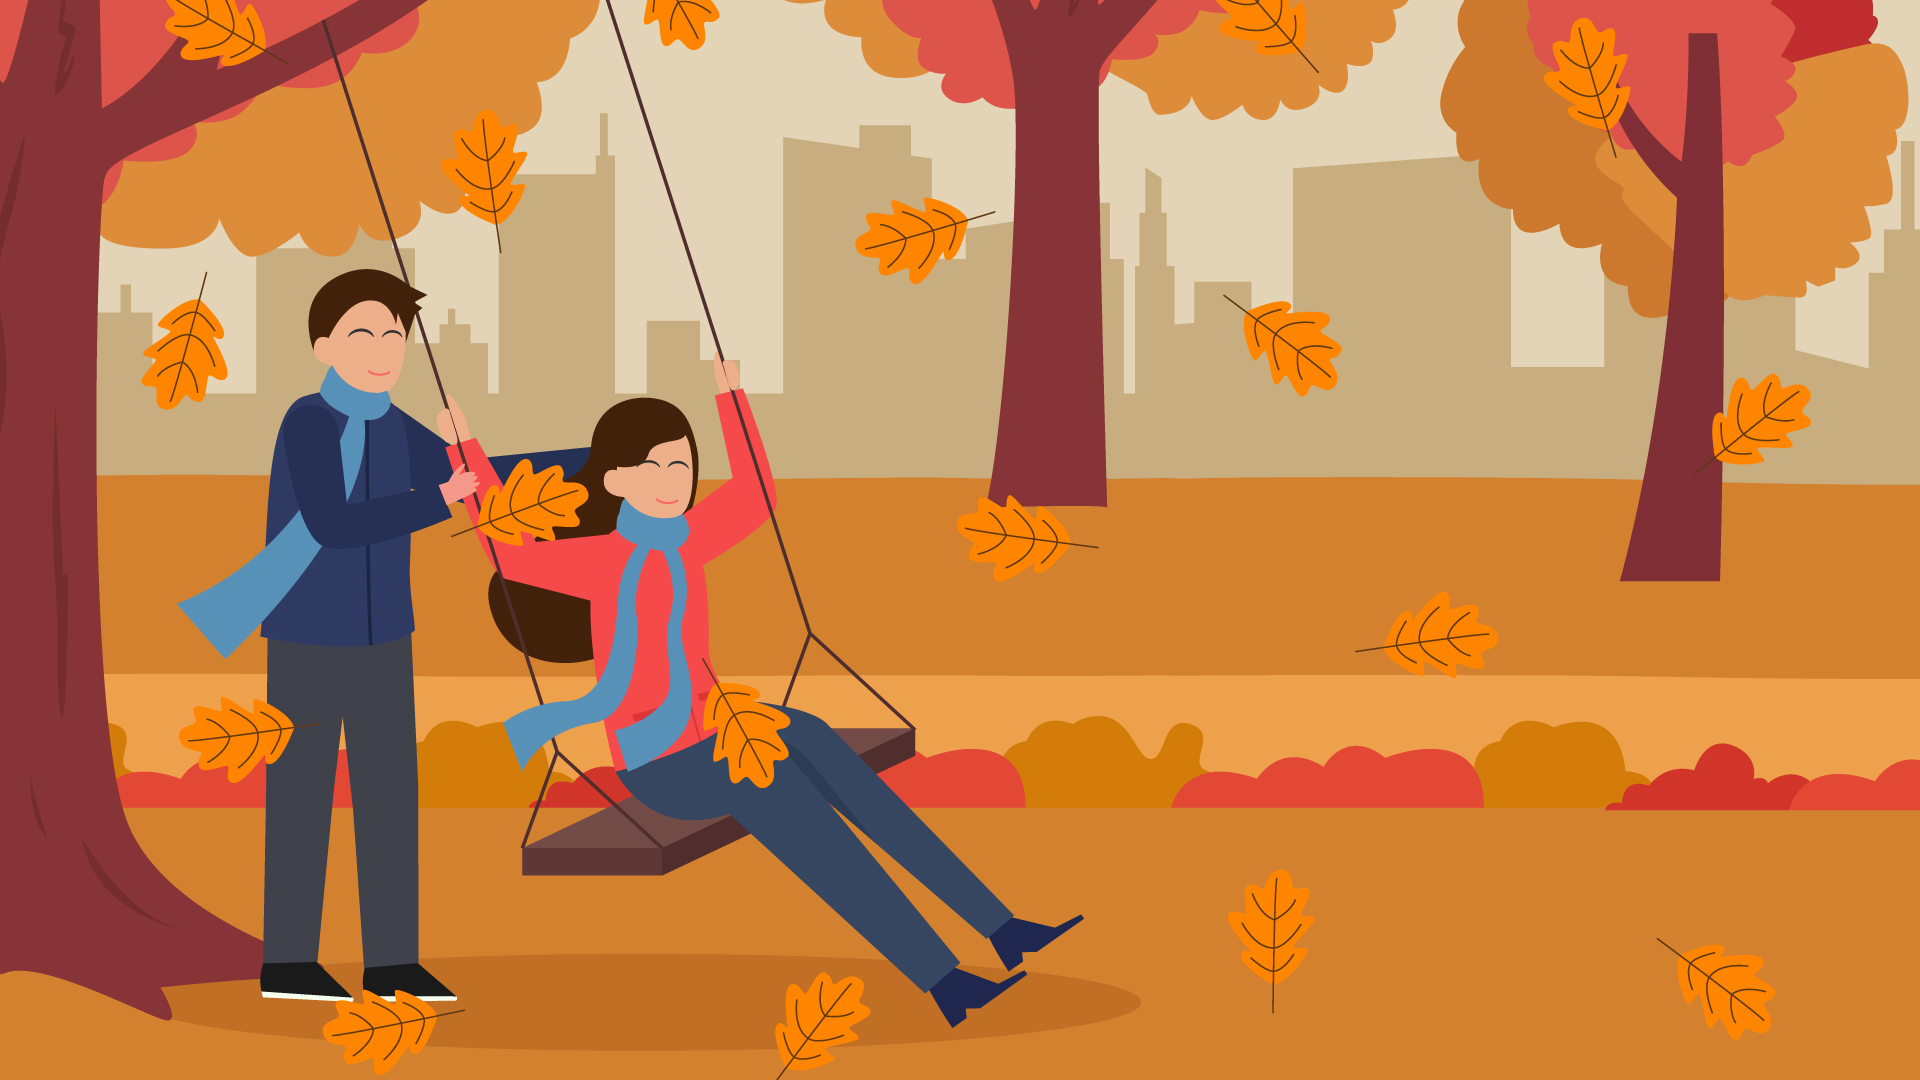 Man and woman in park, the woman sitting on a swing while man pushes her from behind. Yellow leaves fall around them.